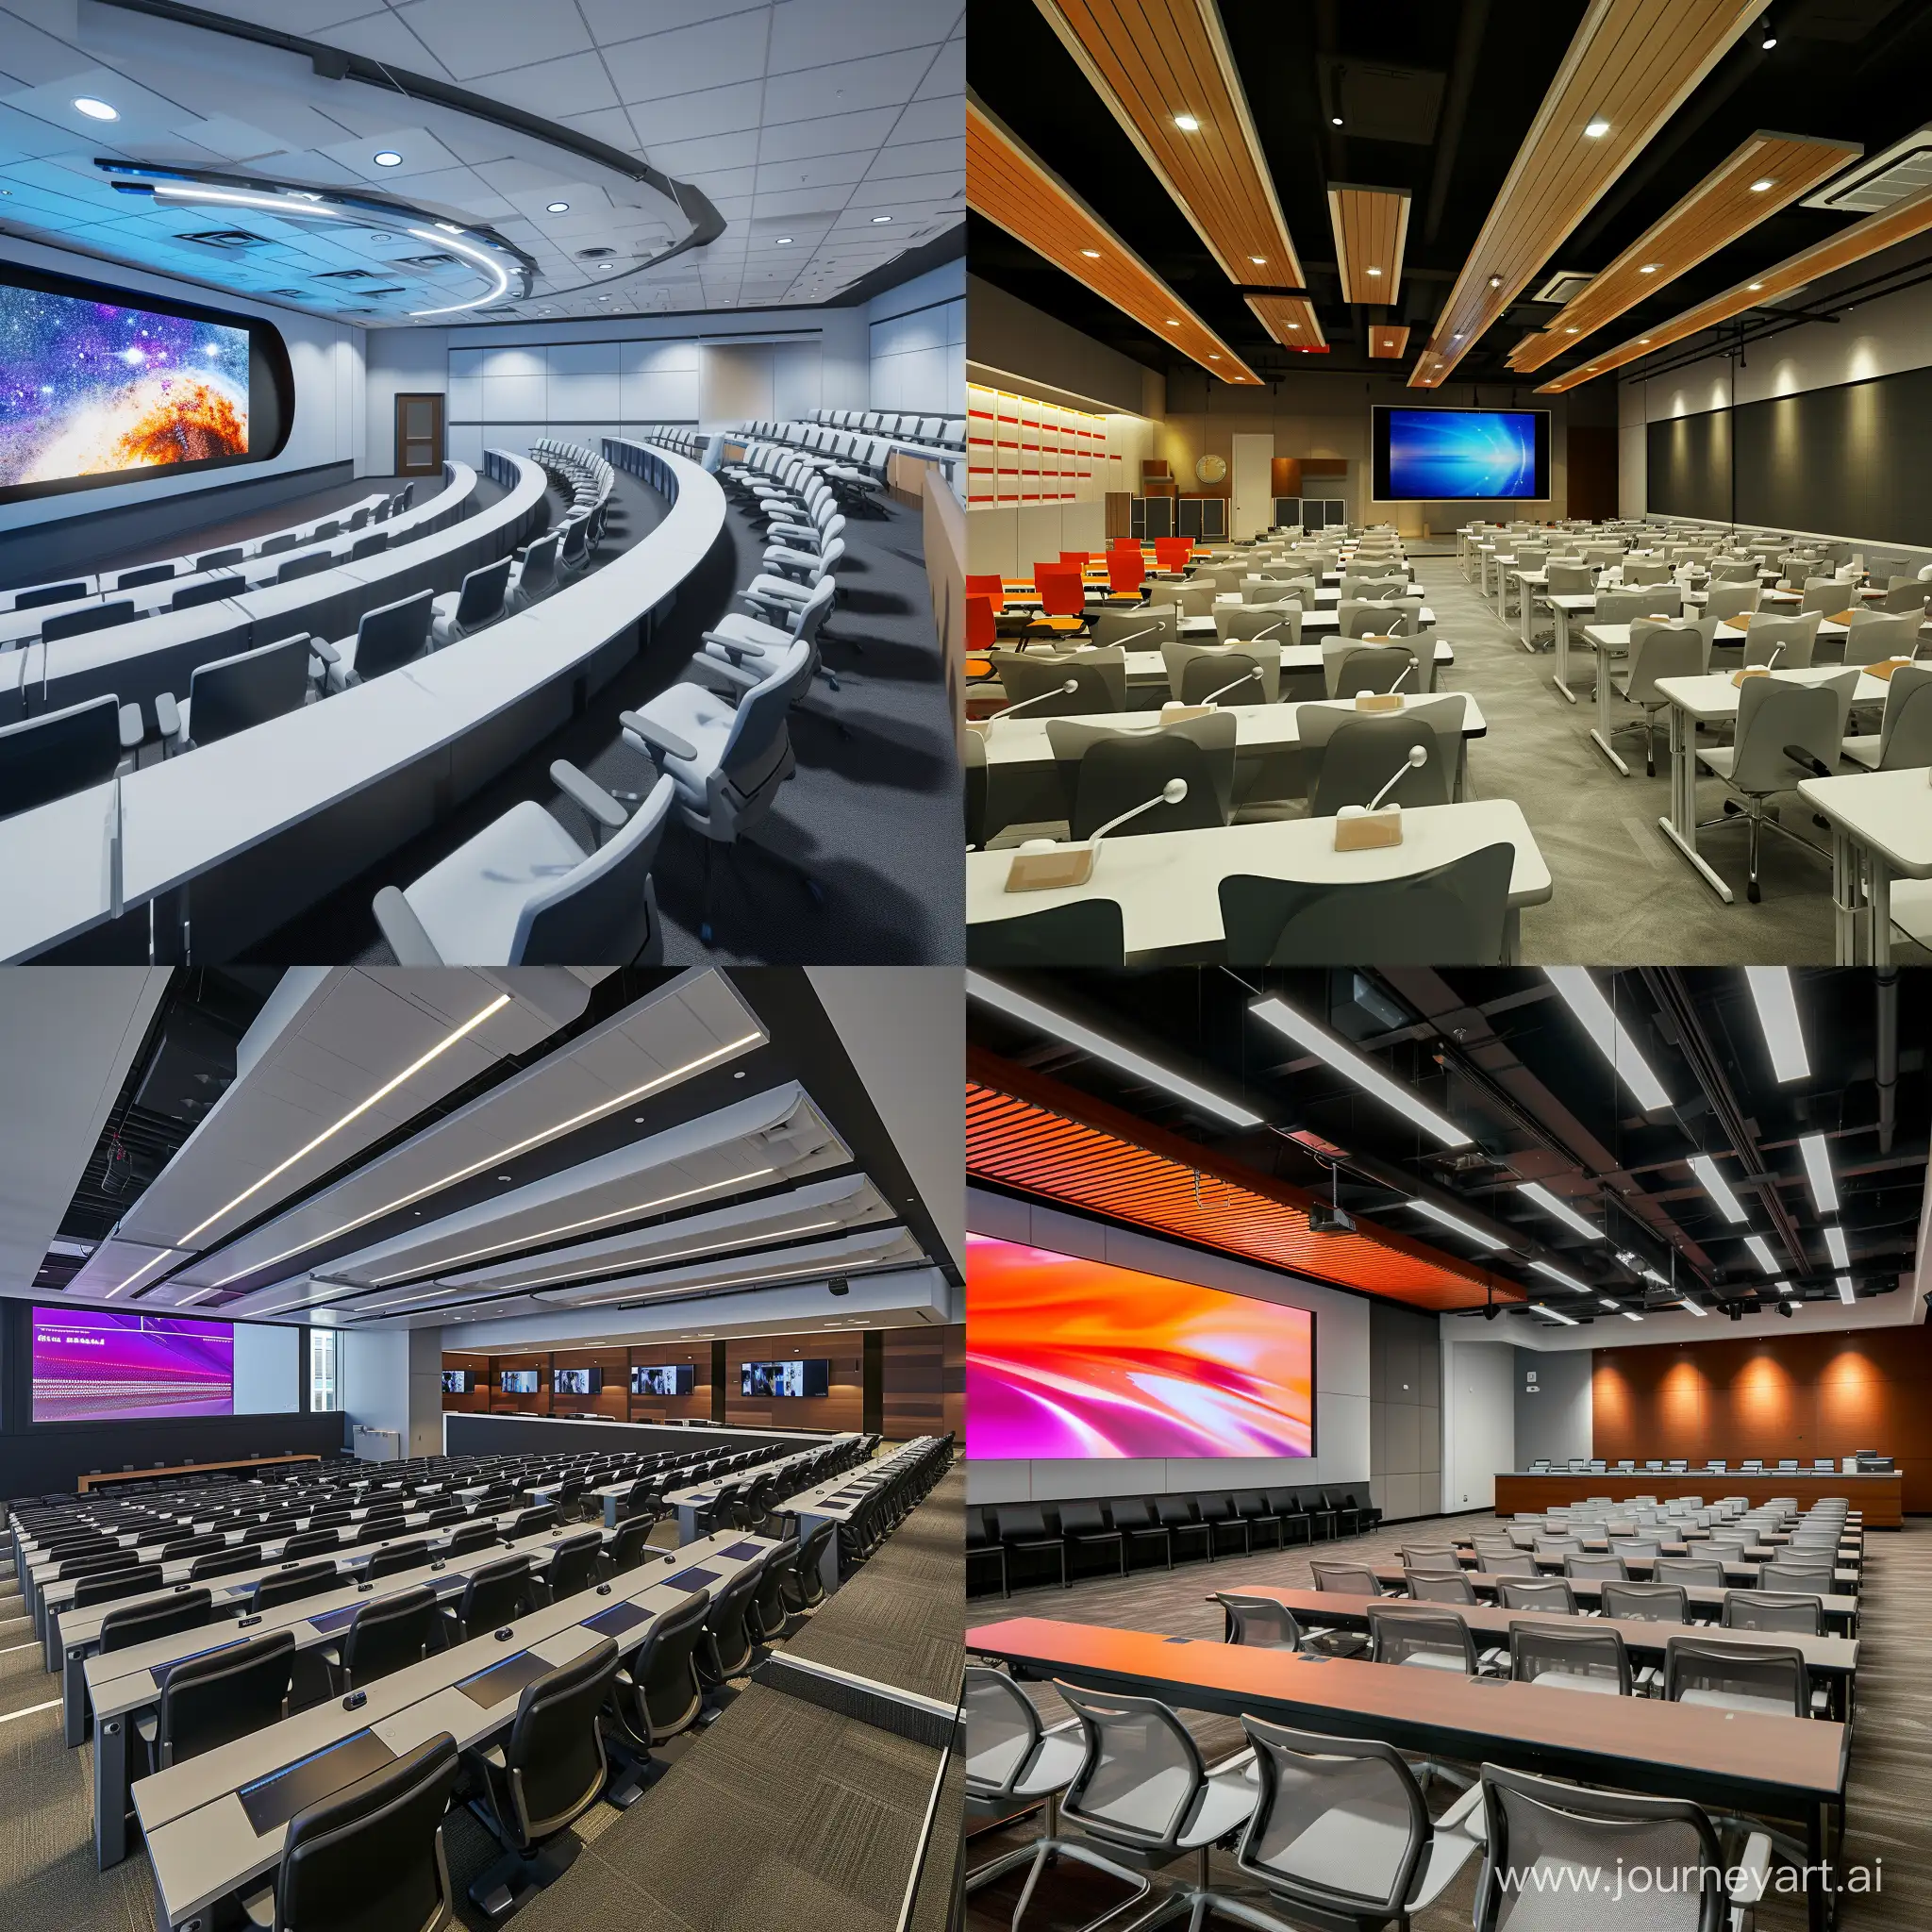 StateoftheArt-Training-Center-with-25Seater-Labs-and-200Seater-Lecture-Hall